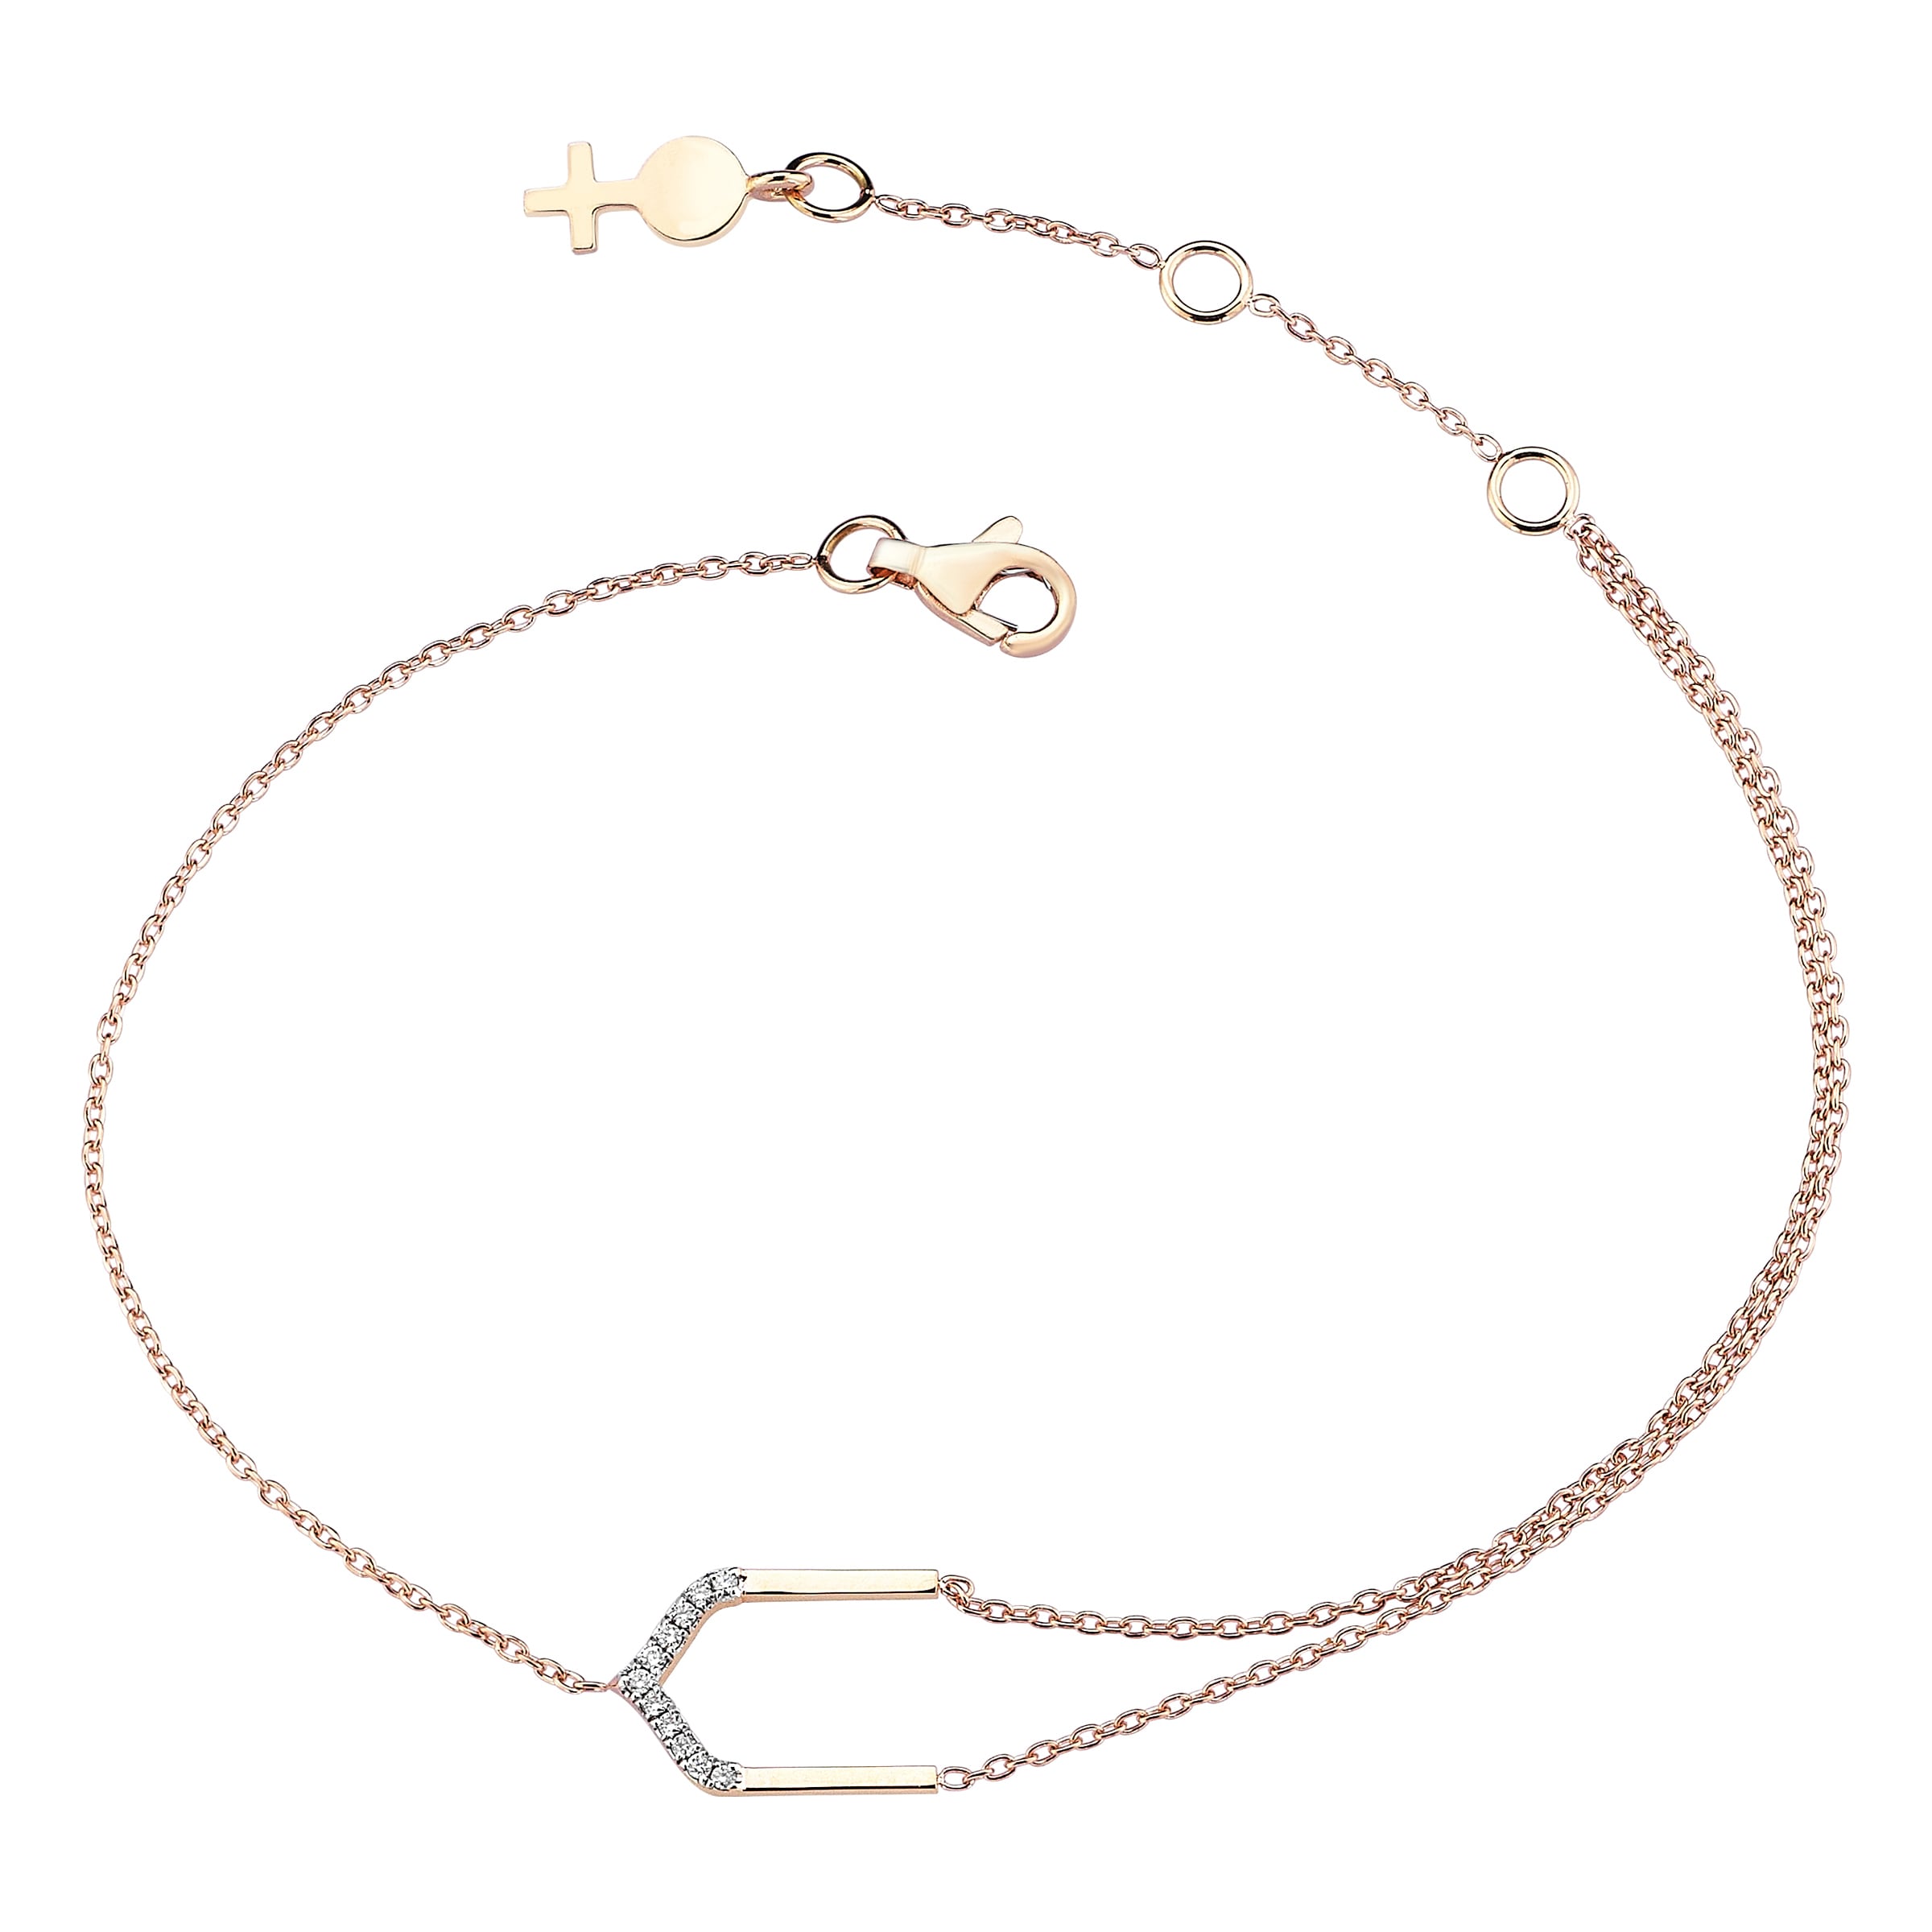 Four Centered Arch Bracelet in Rose Gold - Her Story Shop